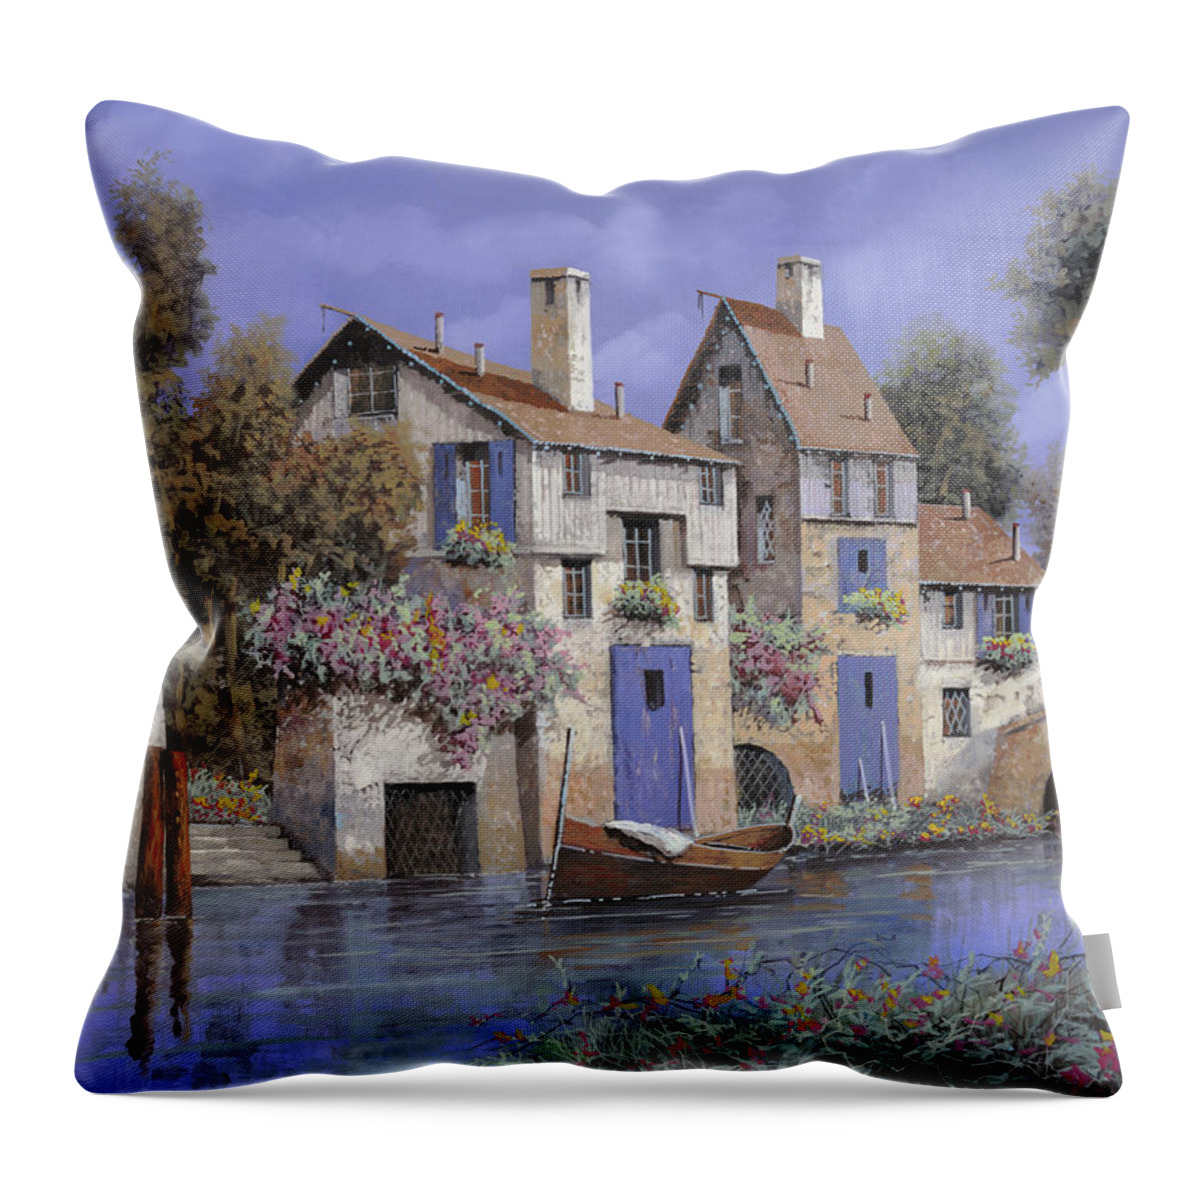 Stream Throw Pillow featuring the painting Un Borgo Tutto Blu by Guido Borelli